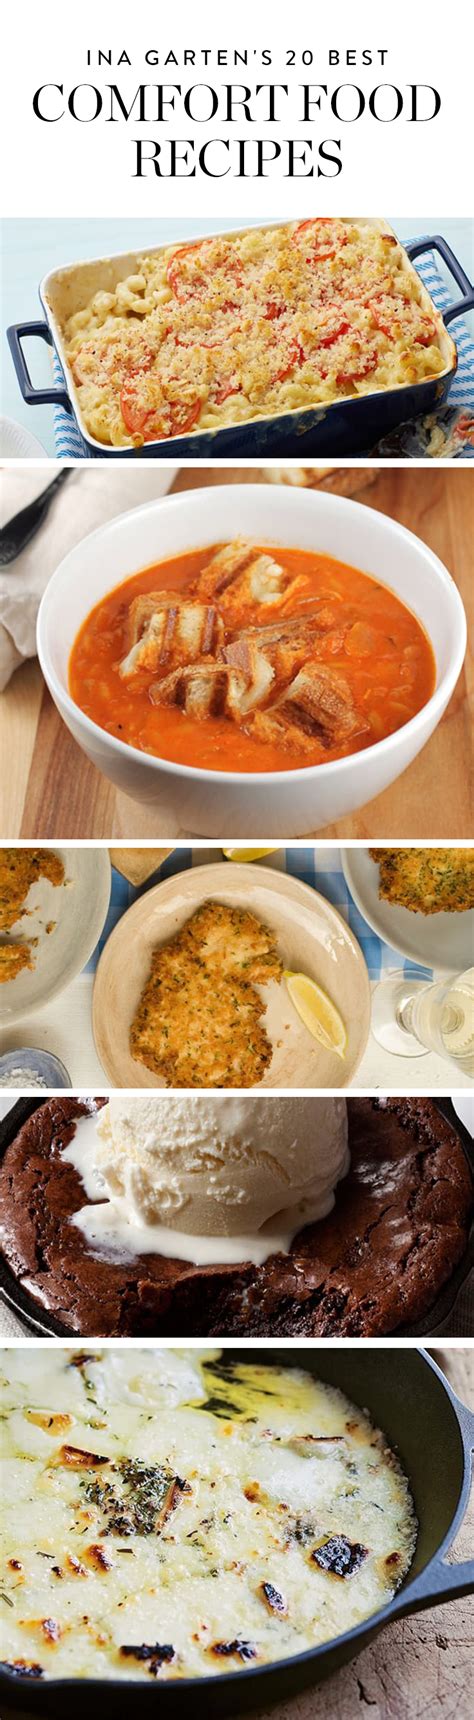 The gravy is great on the chicken, but mash up some potatoes with some butter and cream and bake up some cornbread or biscuits and you have the quintessential southern meal with some northern urban twists. Ina Garten's 20 Best Comfort Food Recipes Will Get You ...